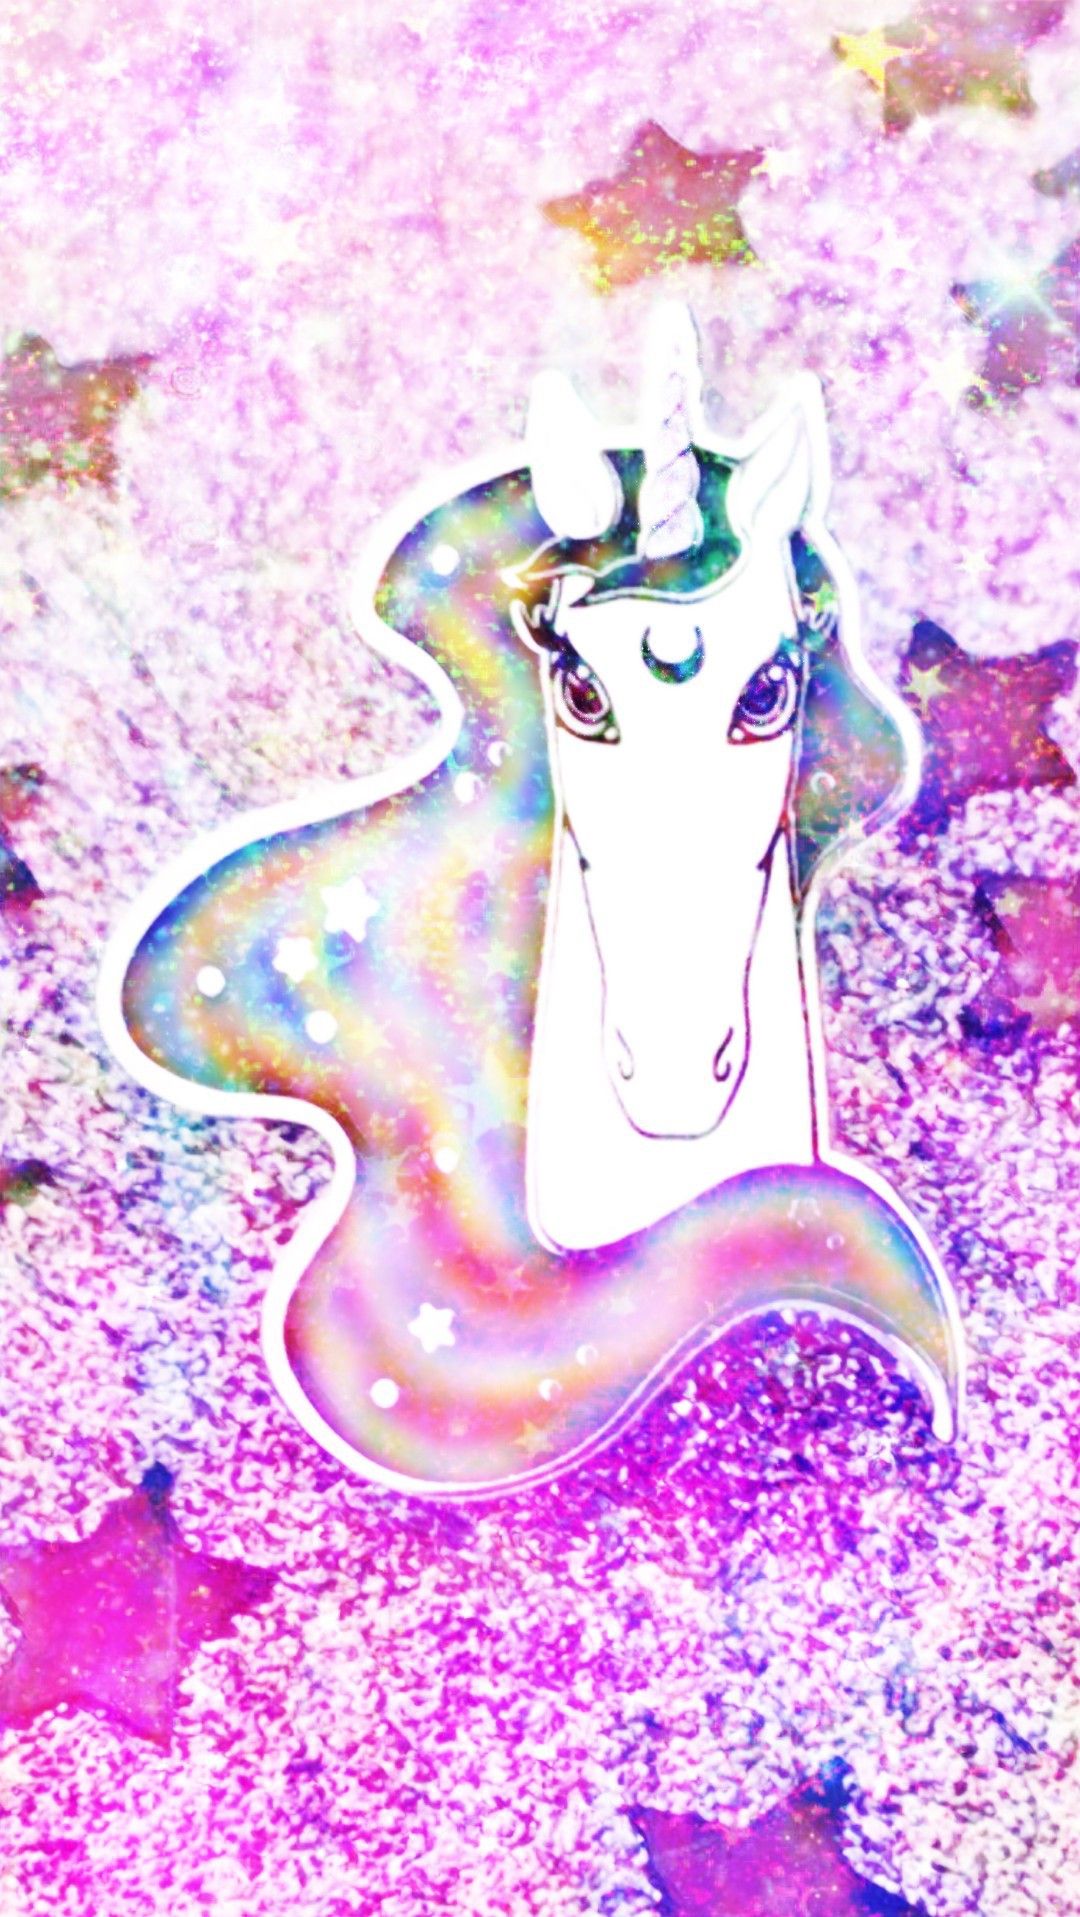 Glittery Unicorn, made by me #purple #sparkly #wallpaper #background #sparkles #glittery #g. Purple sparkly wallpaper, Animal print wallpaper, Rainbow wallpaper